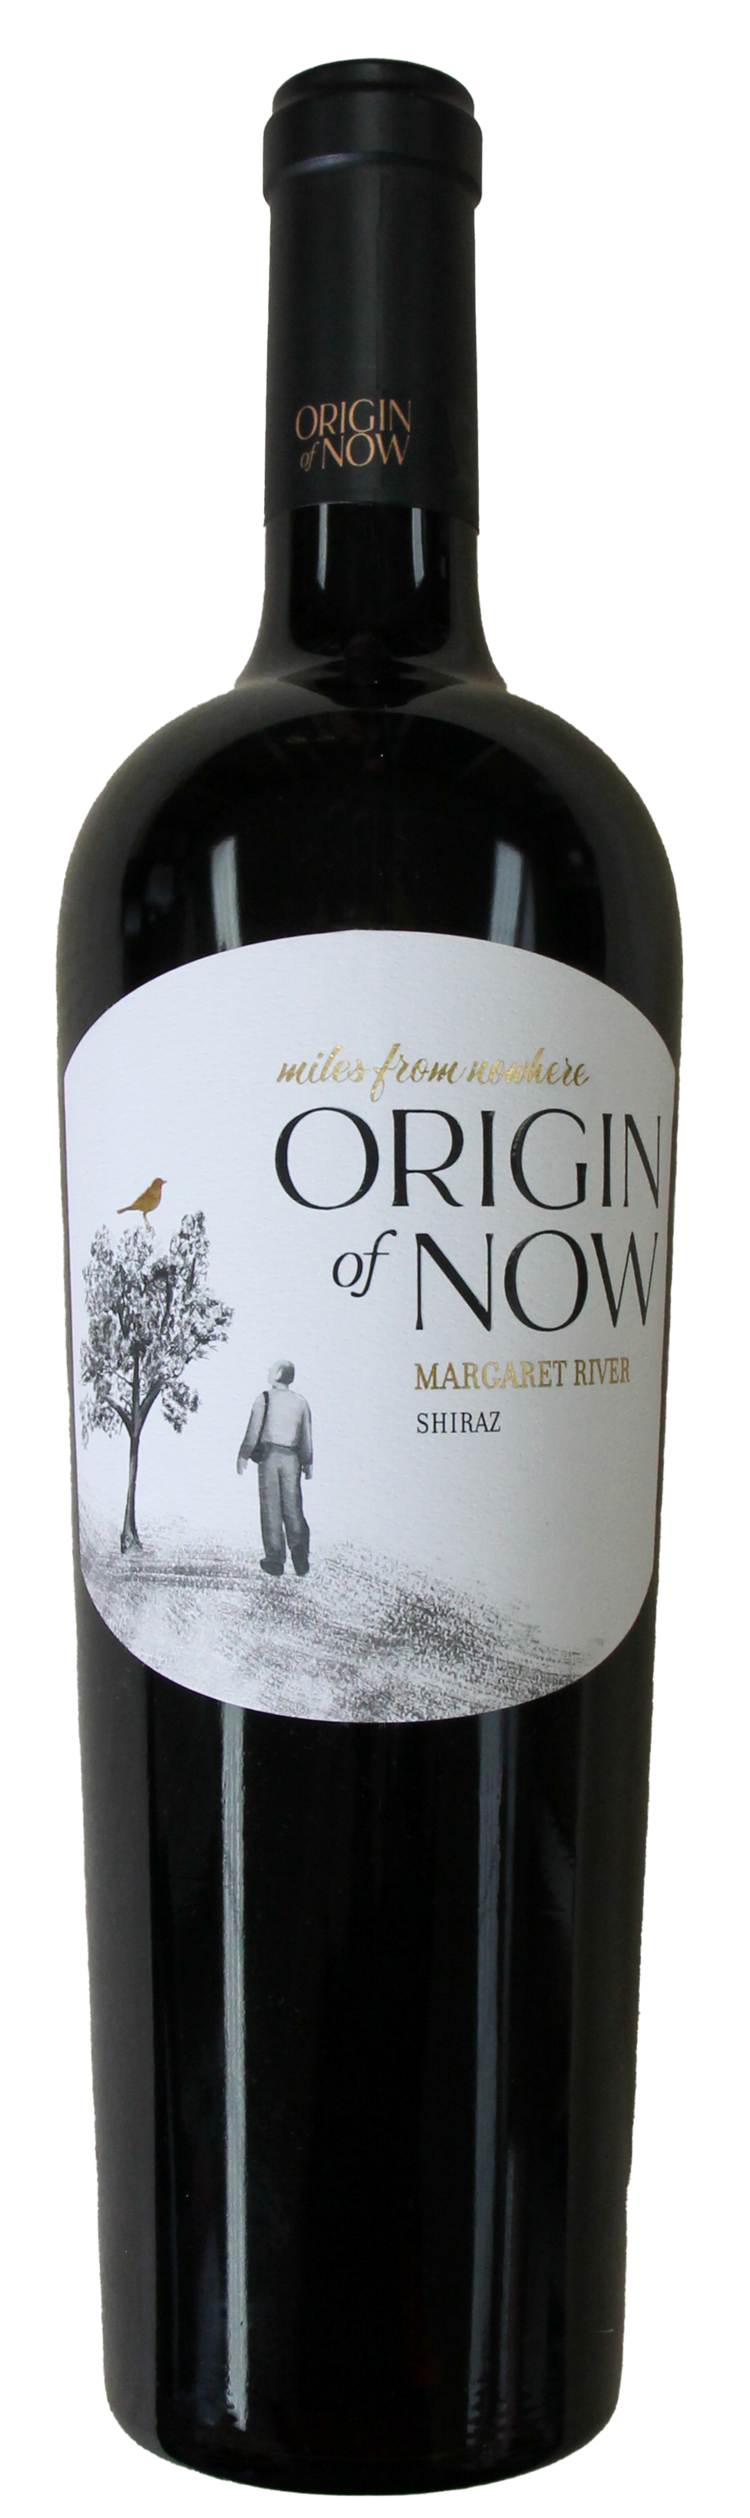 Origin of Now by Miles from Nowhere Margaret River Shiraz 2021